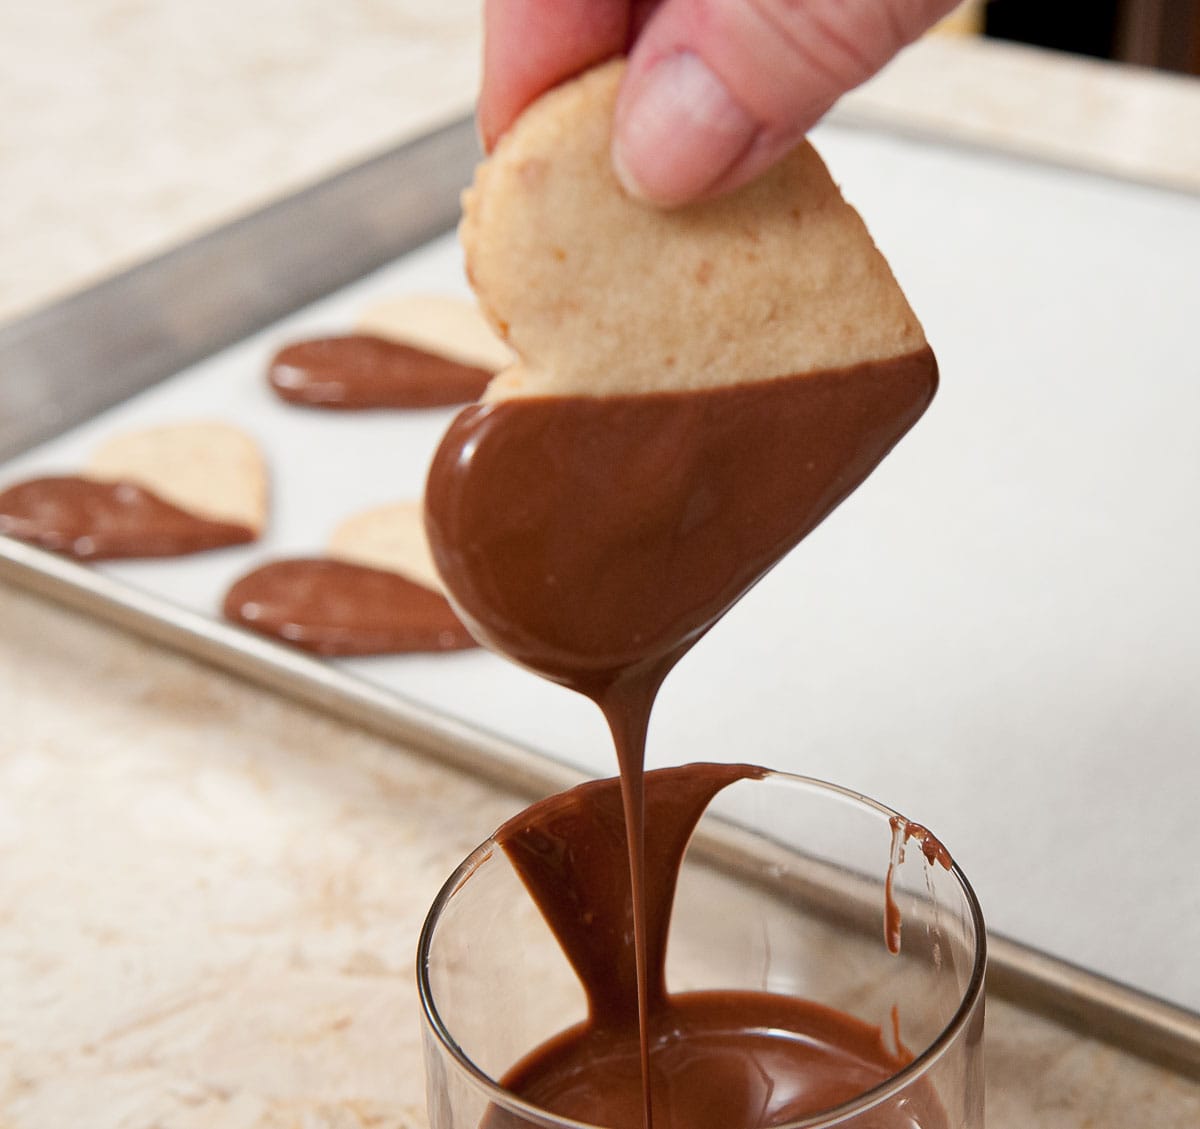 The back of the cookie is being lightly wiped on the rim of the glass to remove chocolate that would puddle around the bottom of the cookie.